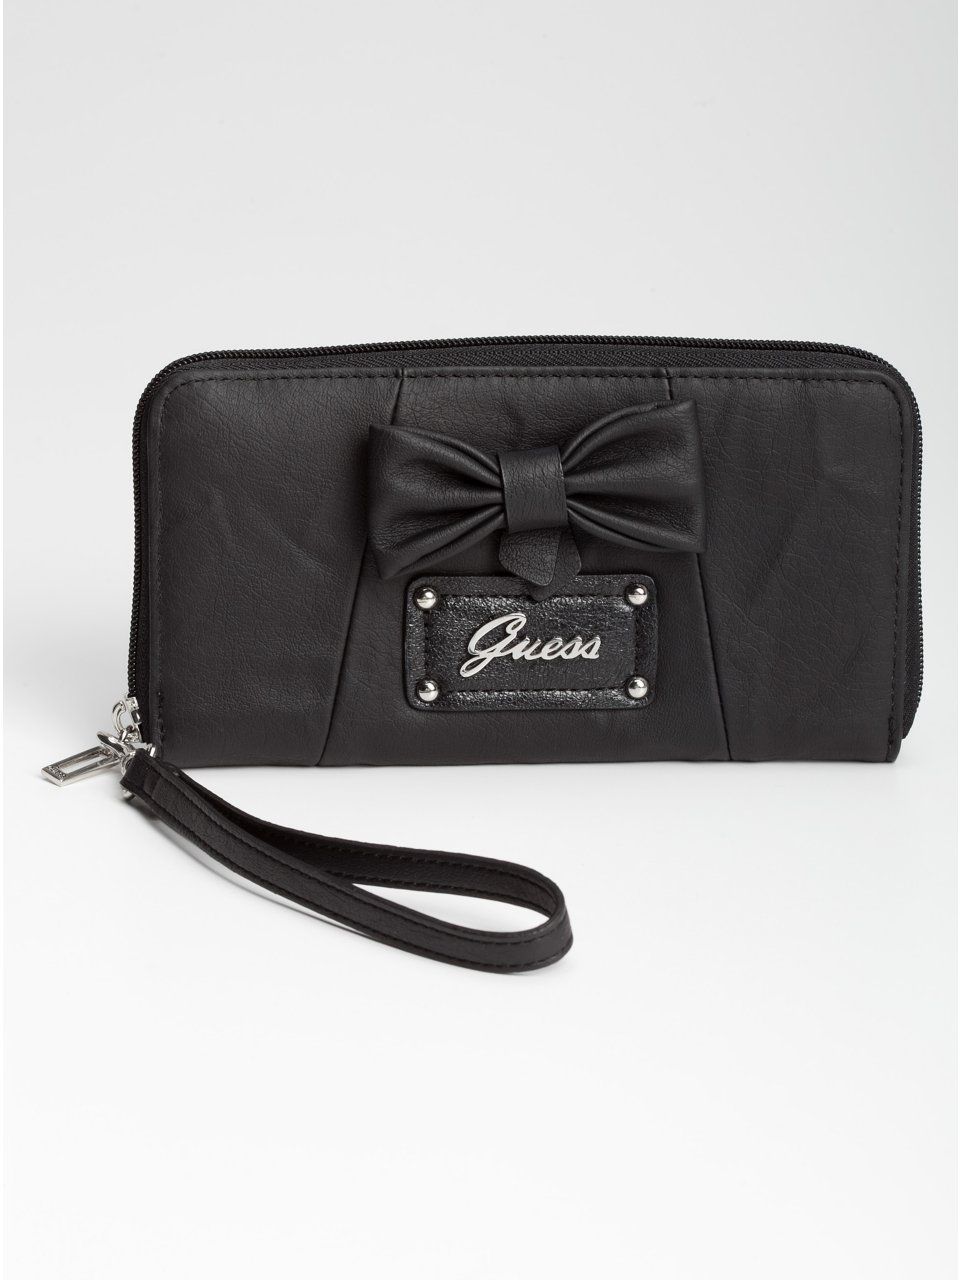 GUESS Fancy Large Zip Around Wallet